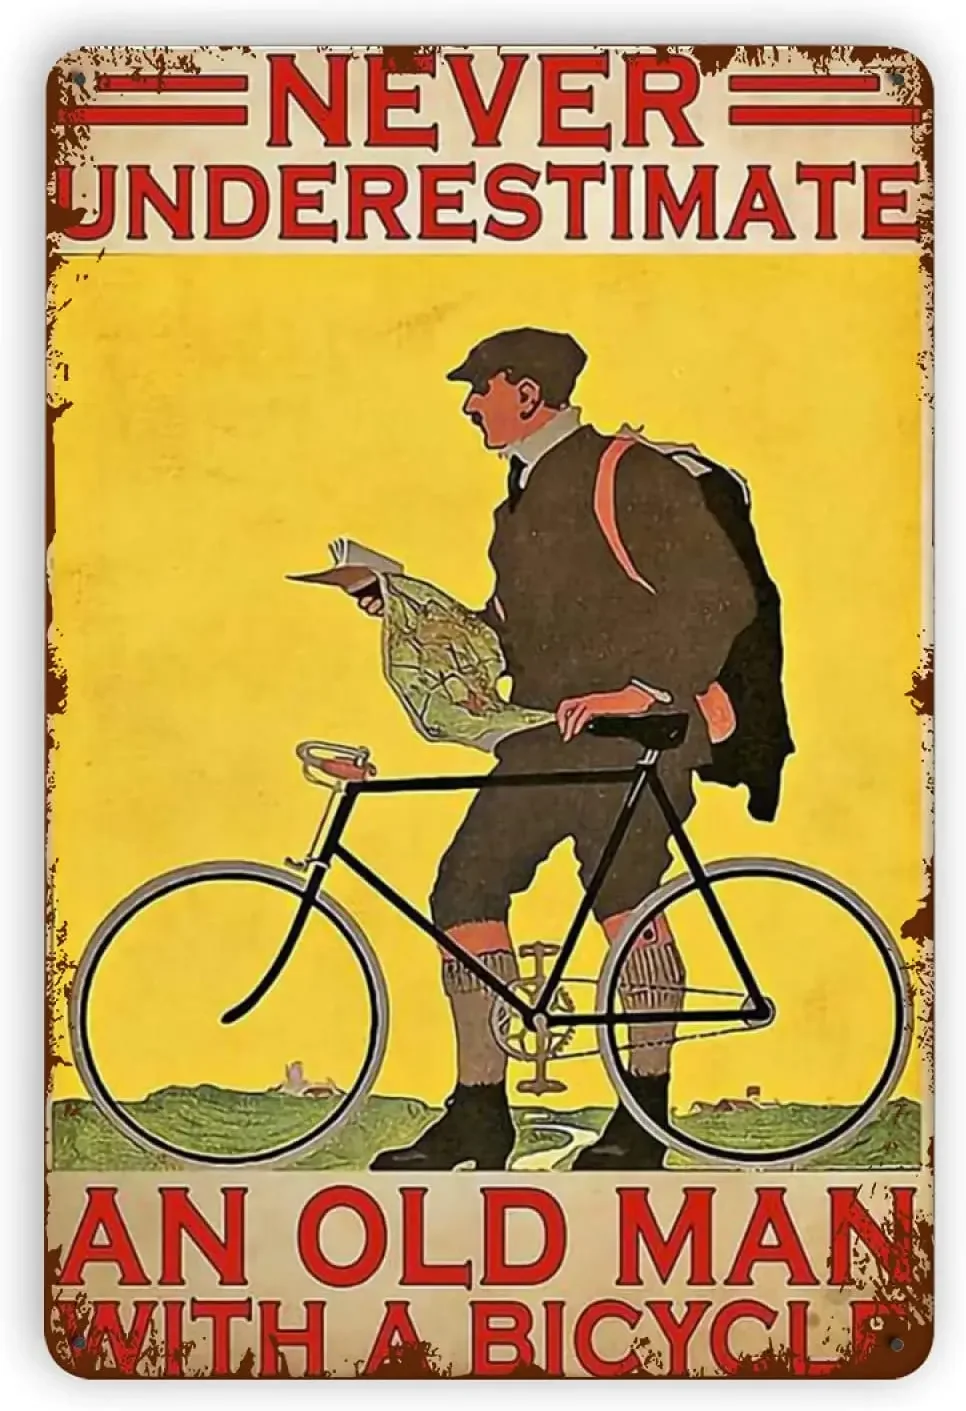 

Vintage Decorative Metal Tin Sign Never Underestimate An Old Man with A Bicycle Home Decoration Metal Plate 8x12 or 12x16 Inches